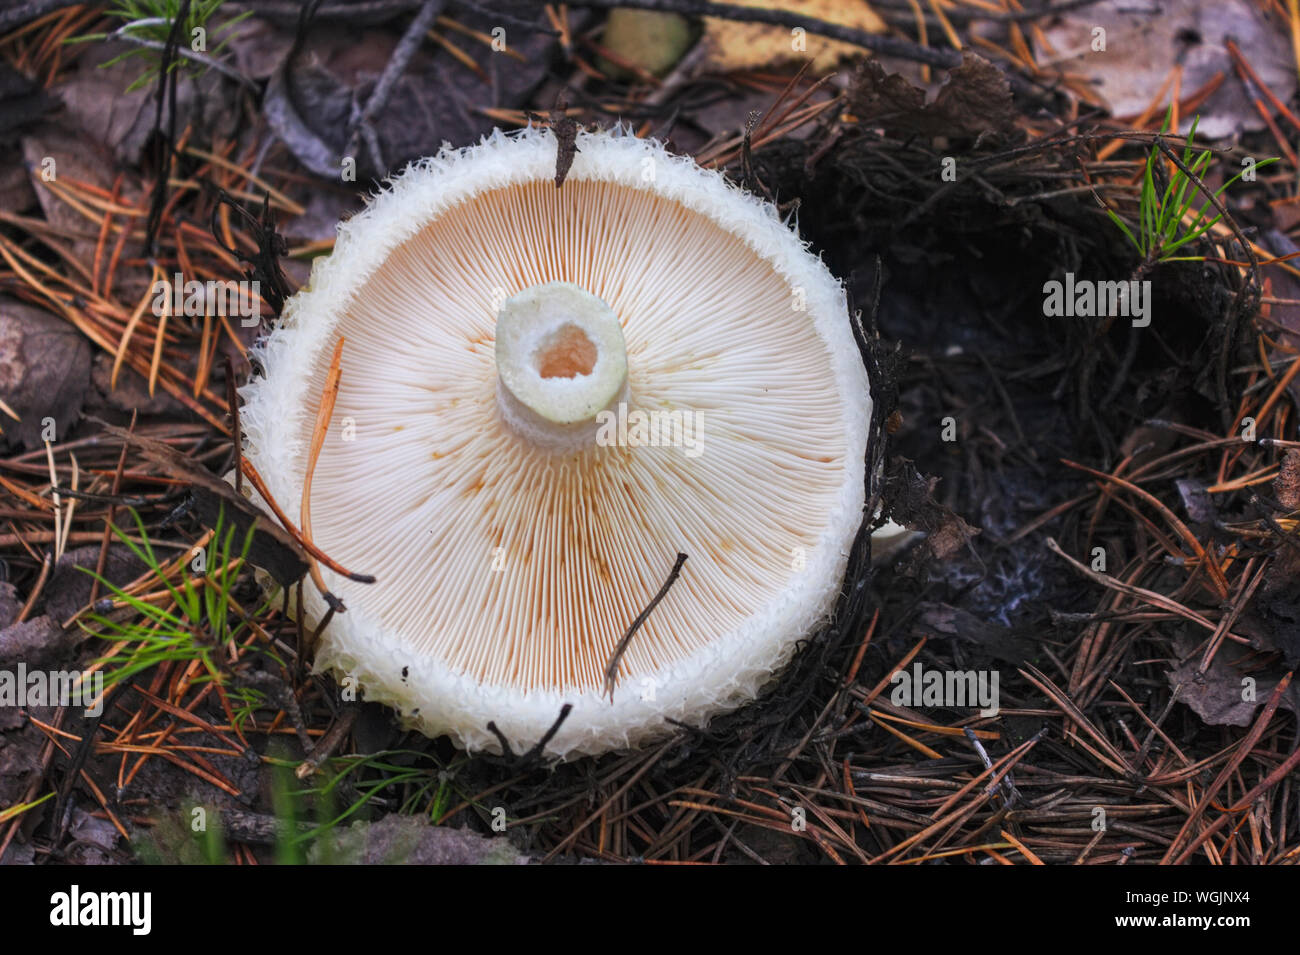 Edible mushroom Lactarius torminosus in natural conditions among the grass and leaves. Stock Photo